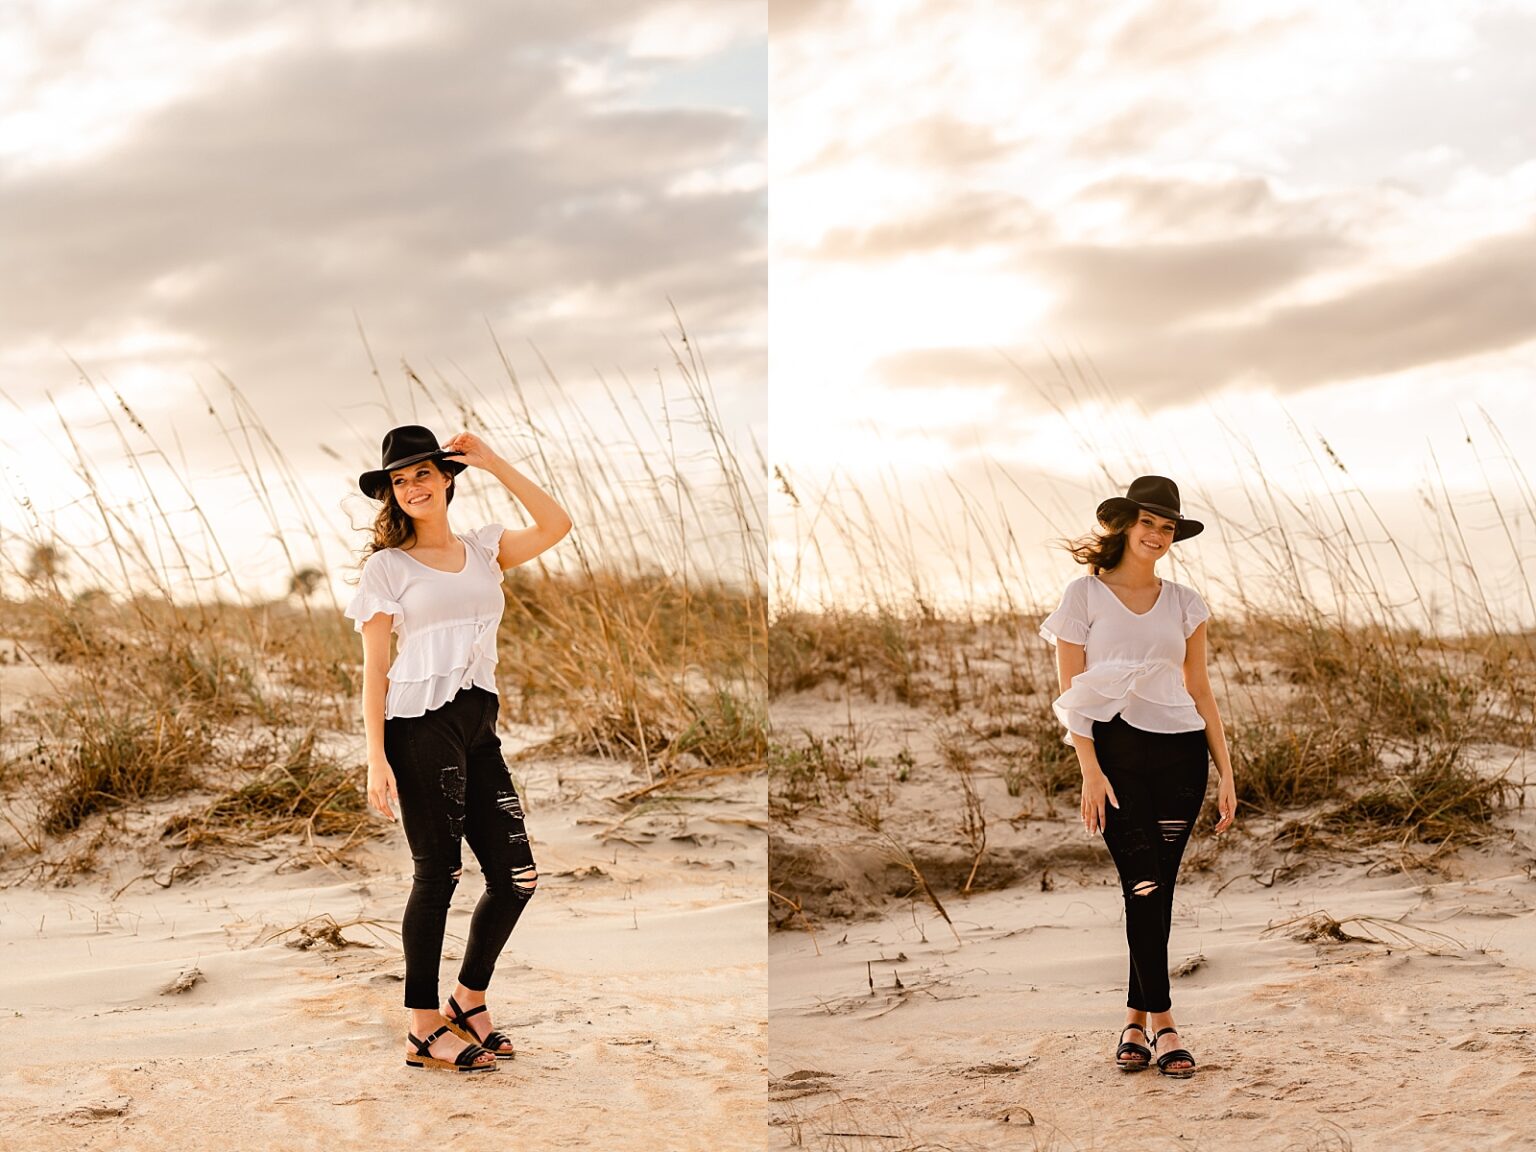 Senior photos on the beach in Florida during golden hour wearing simple black and white outfit and a hat.